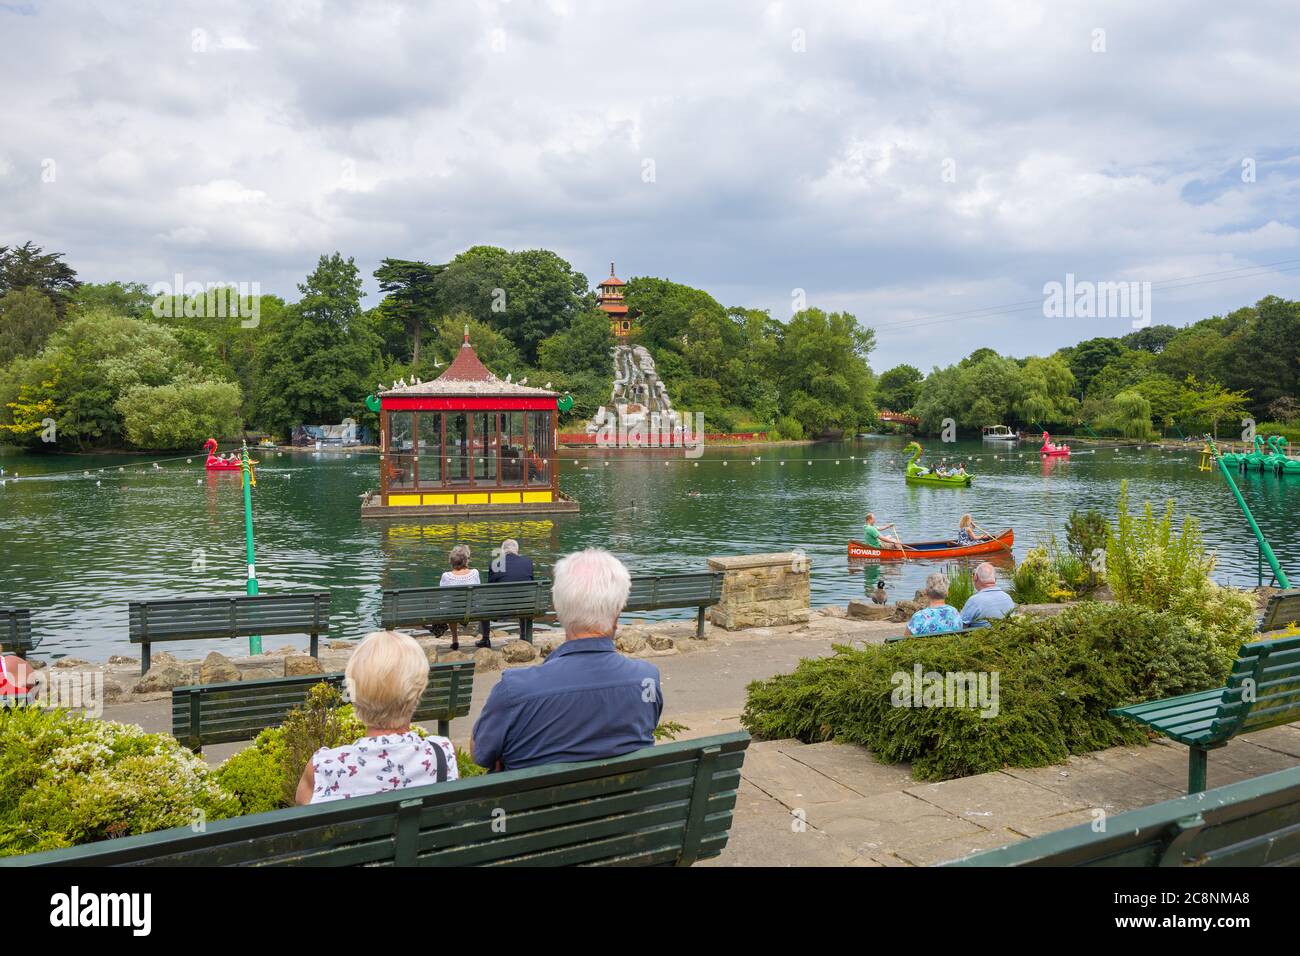 Visitors relaxing and enjoying the view at the Grade II listed Peasholm Park boating lake with its pagoda. Scarborough, North Yorkshire, UK. Stock Photo